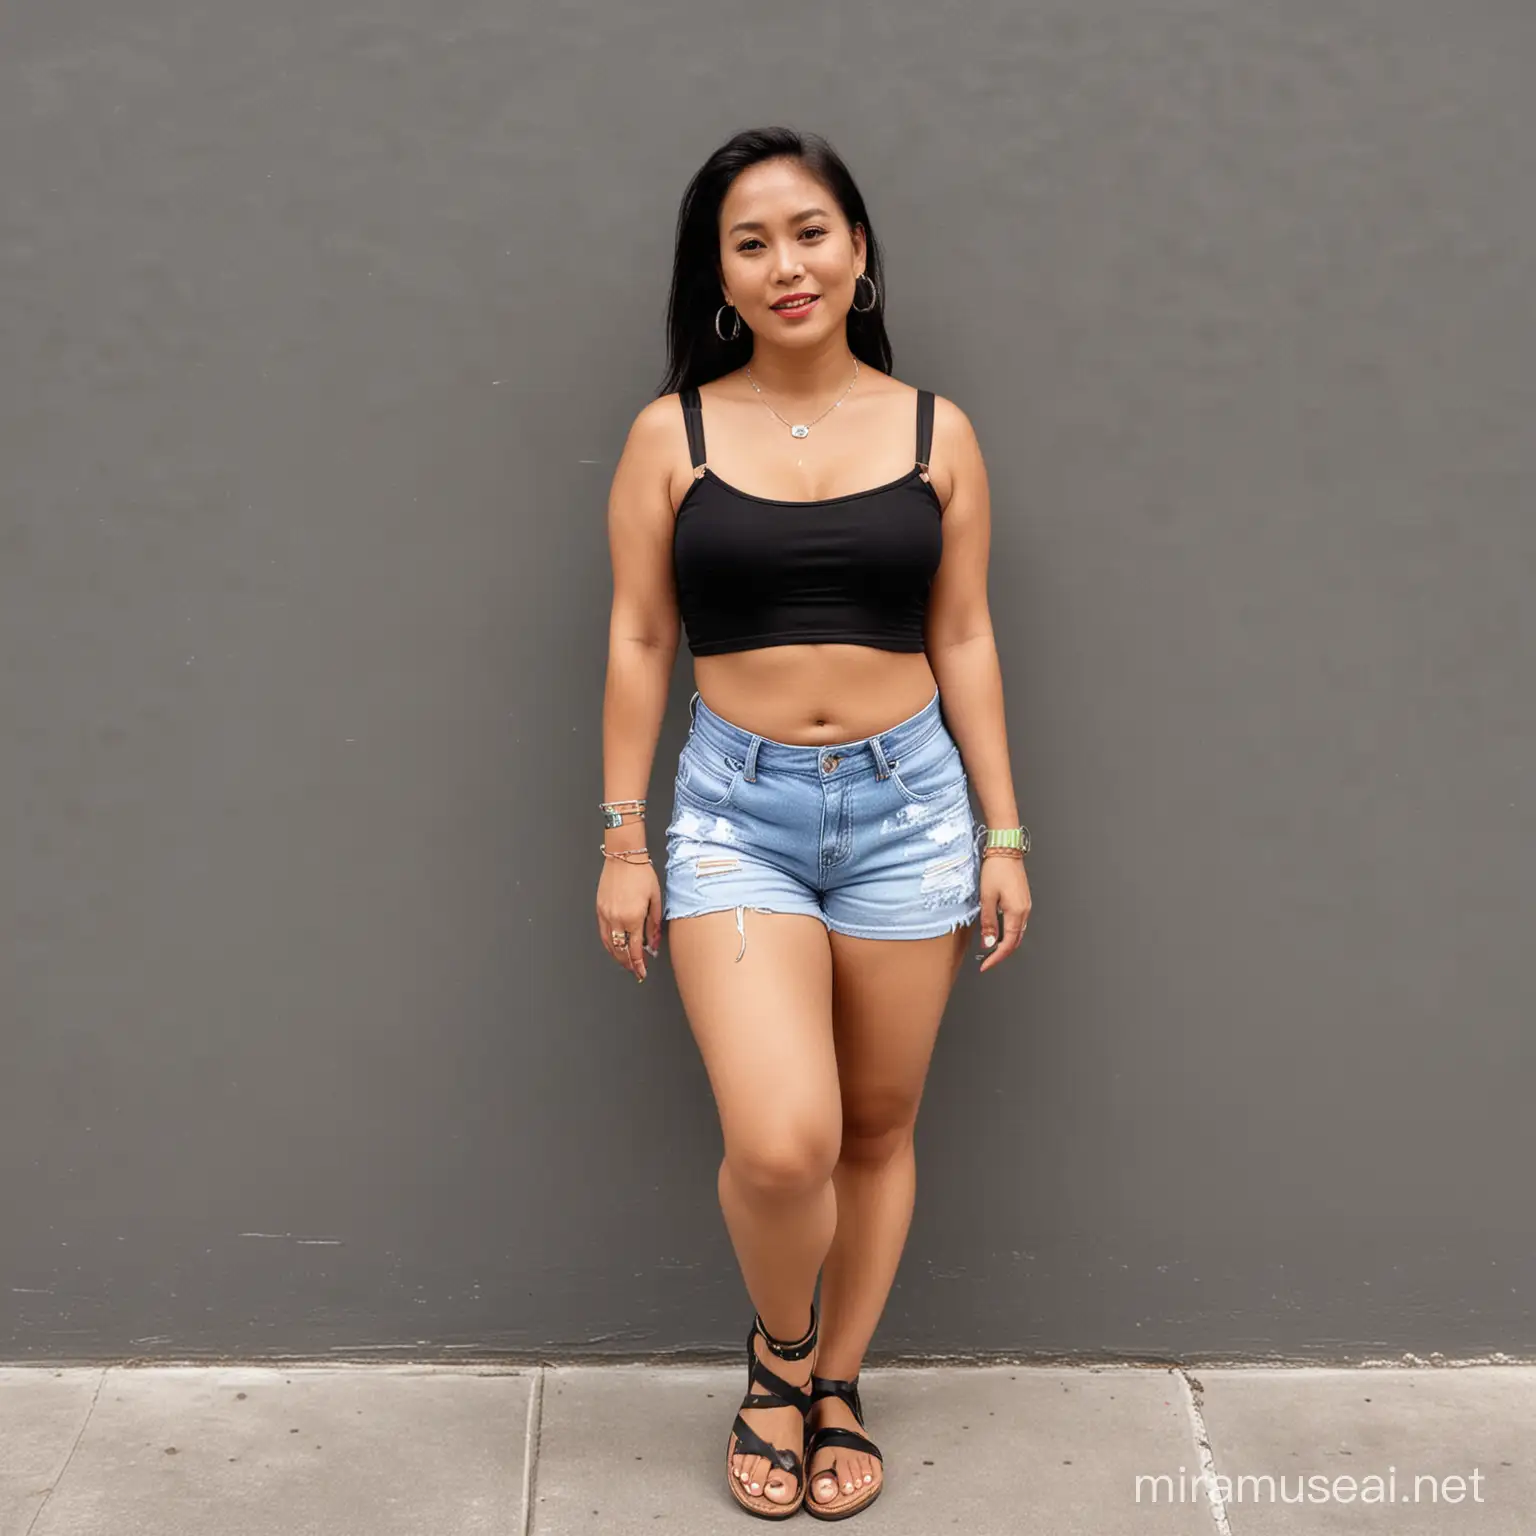 Filipina Midlife Fashionista in Casual Summer Outfit